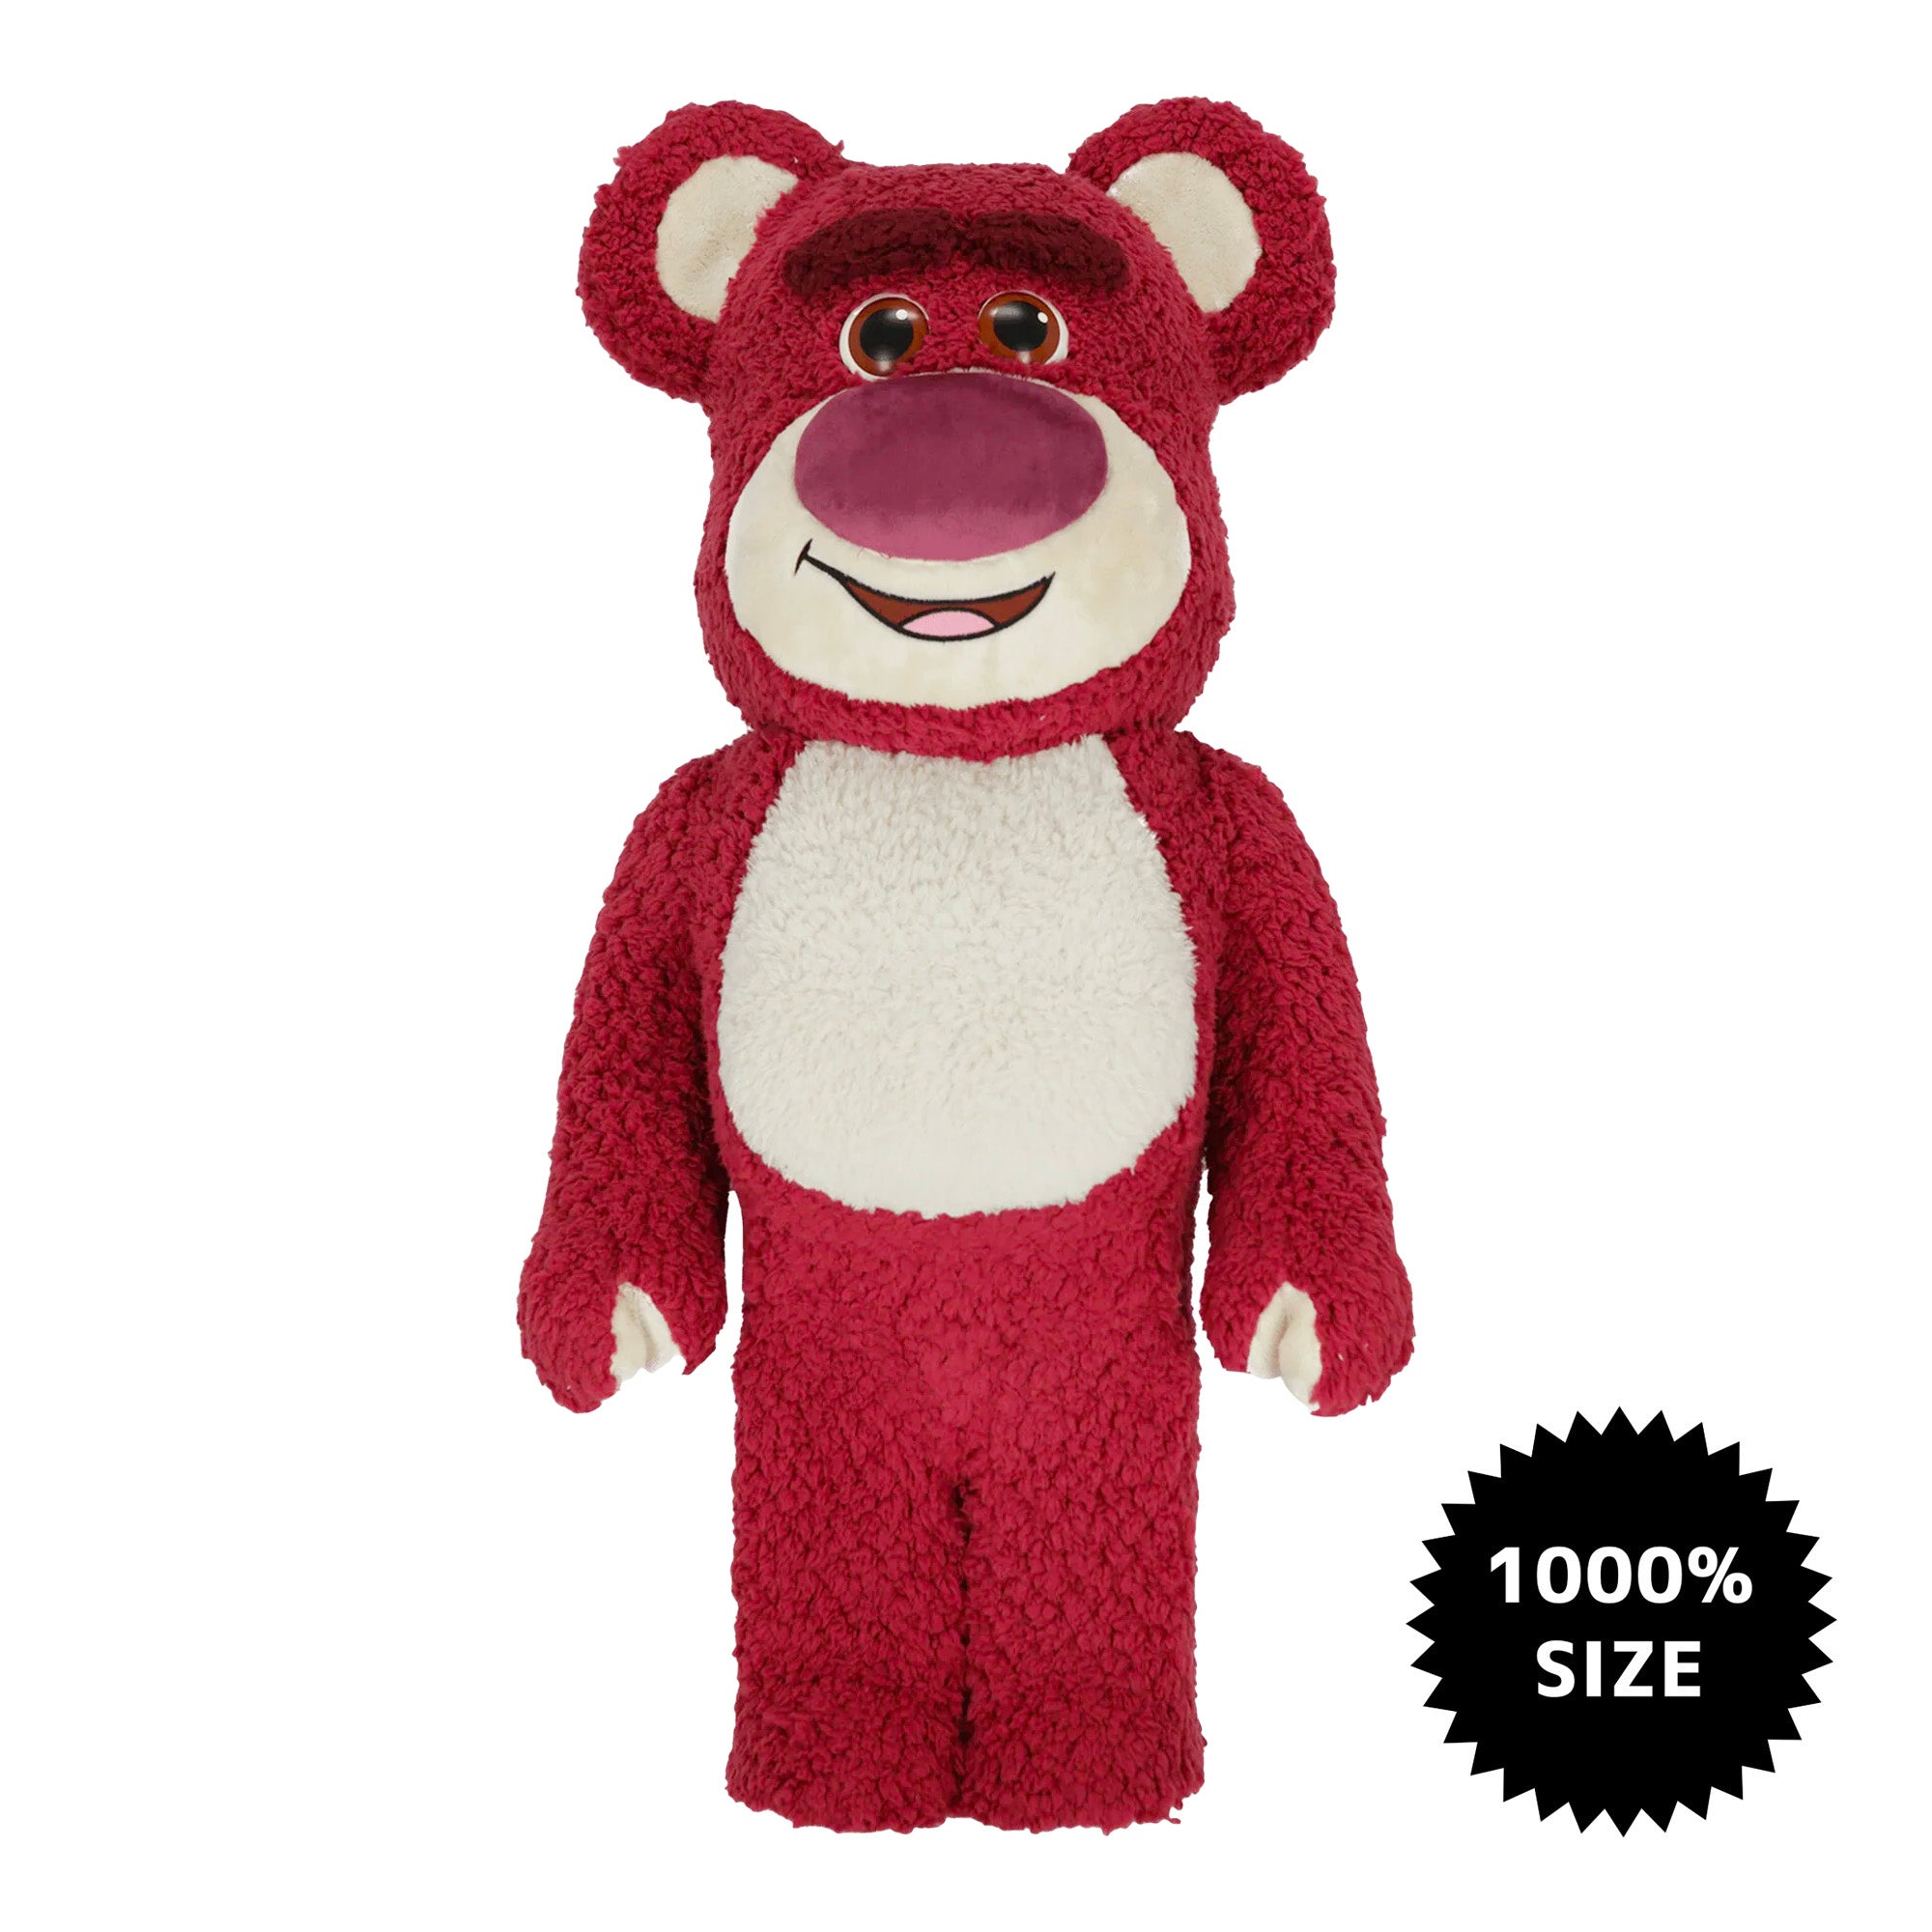 MEDICOM TOY: BE@RBRICK - Toy Story 3 Lots-O Costume 1000% – TOY TOKYO